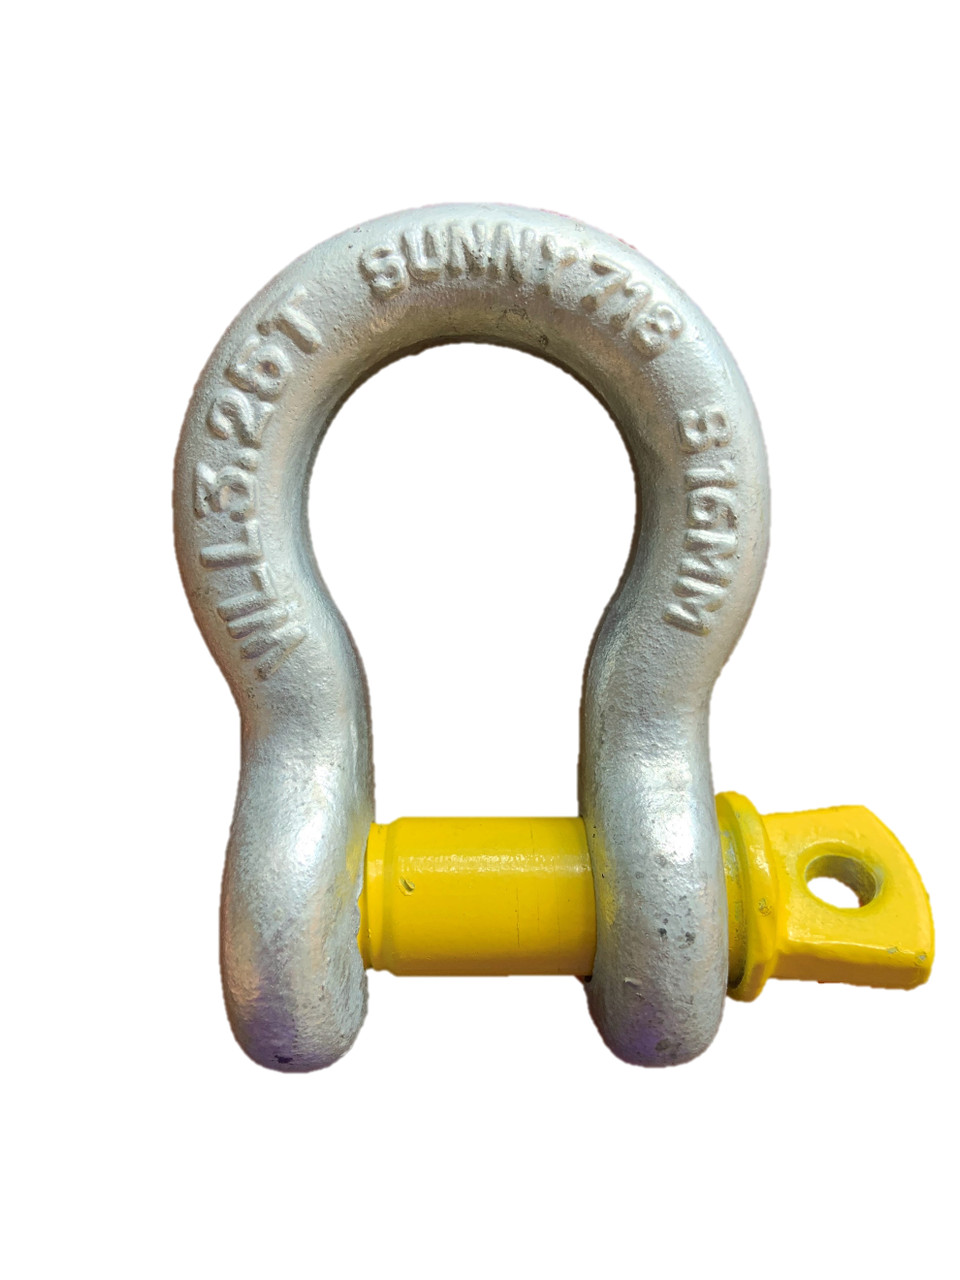 Bow Shackle With Safety Screw 22Mm 6.5Tgrade S